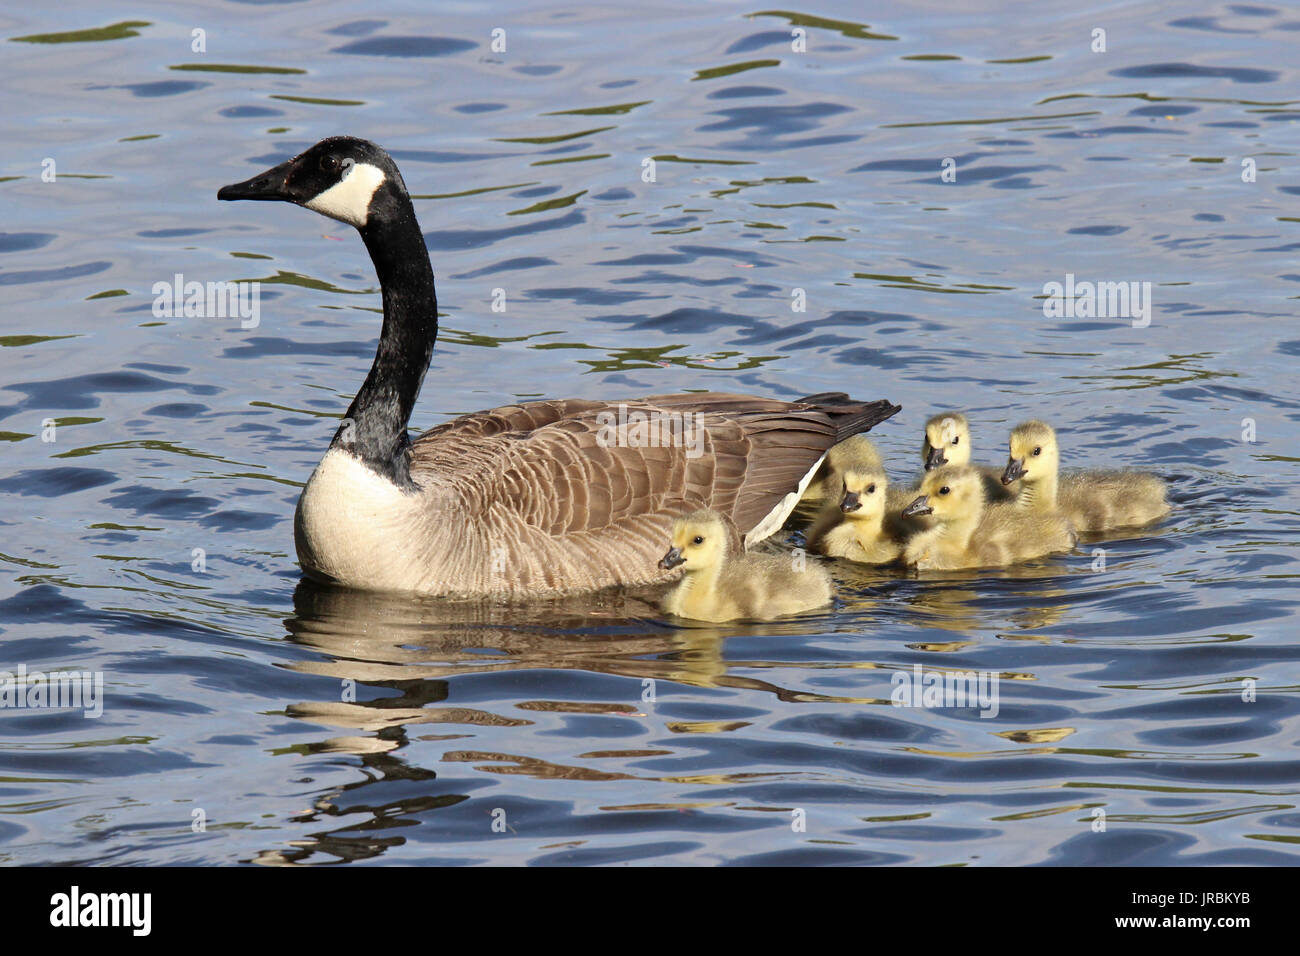 A mother Canada goose swimming on a pond with her family of goslings Stock Photo